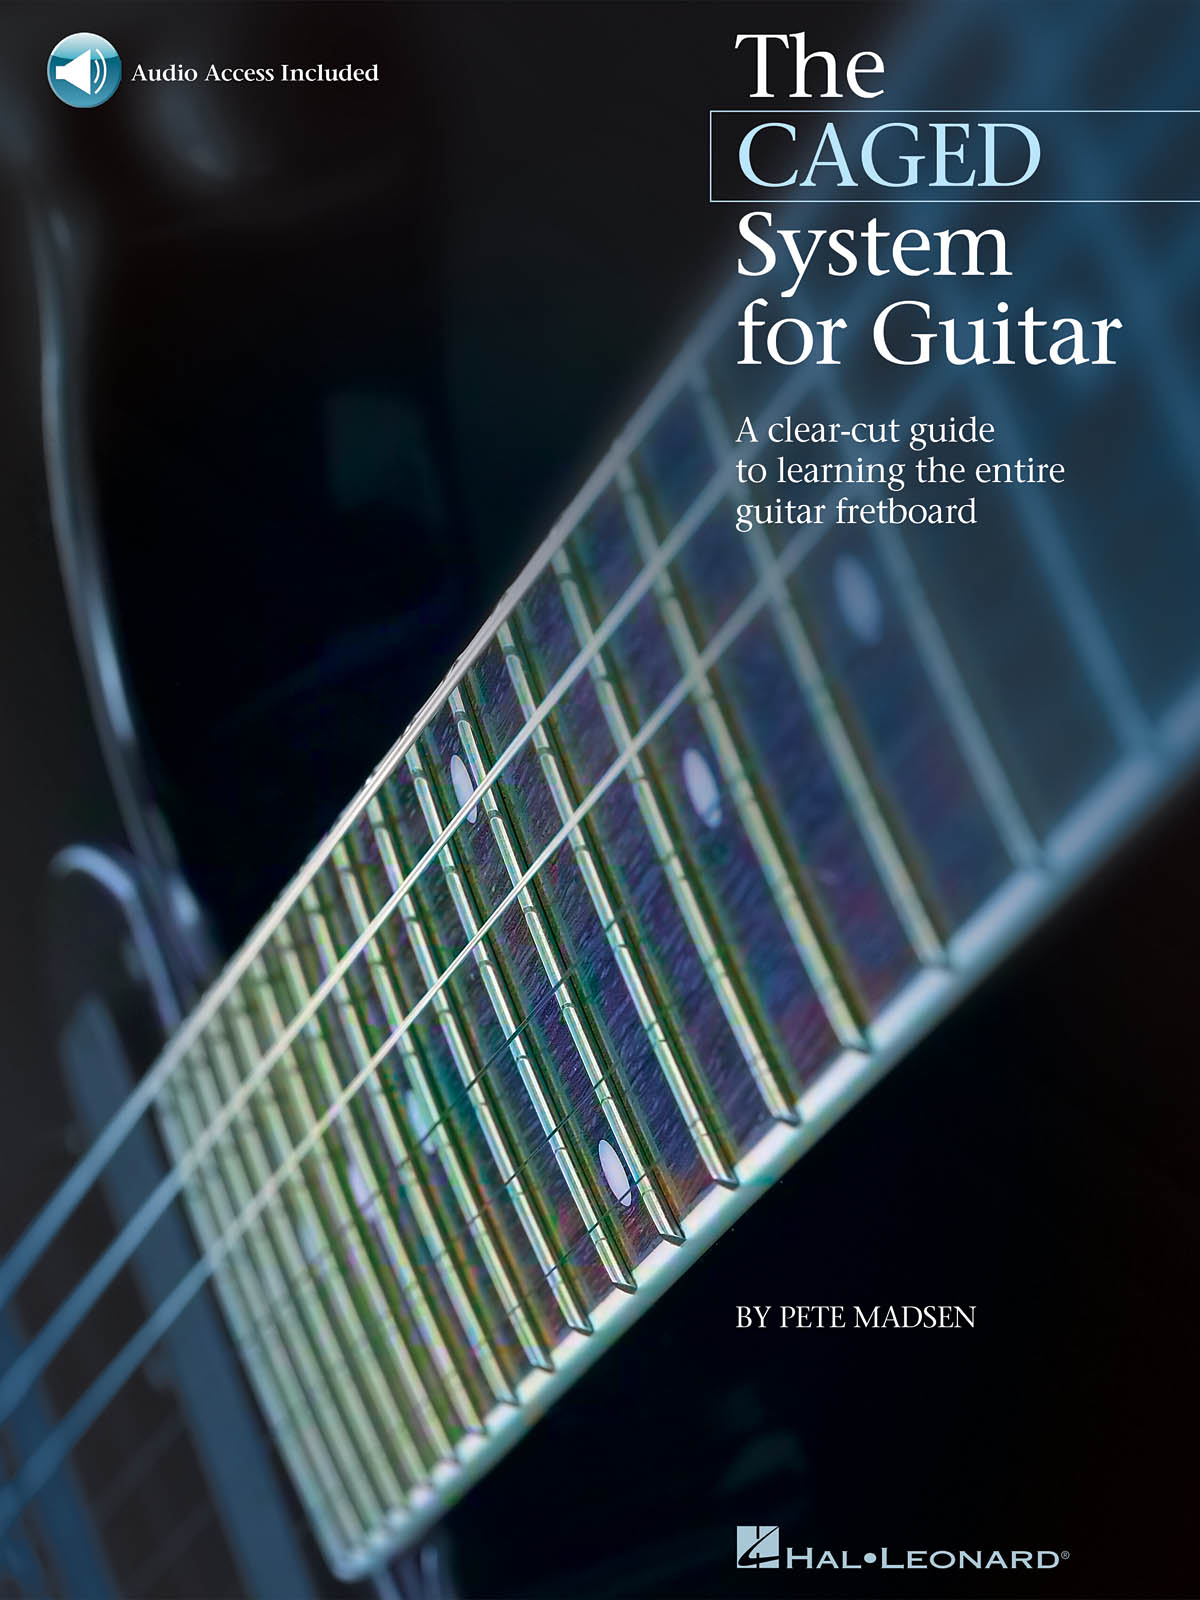 The CAGED System for Guitar